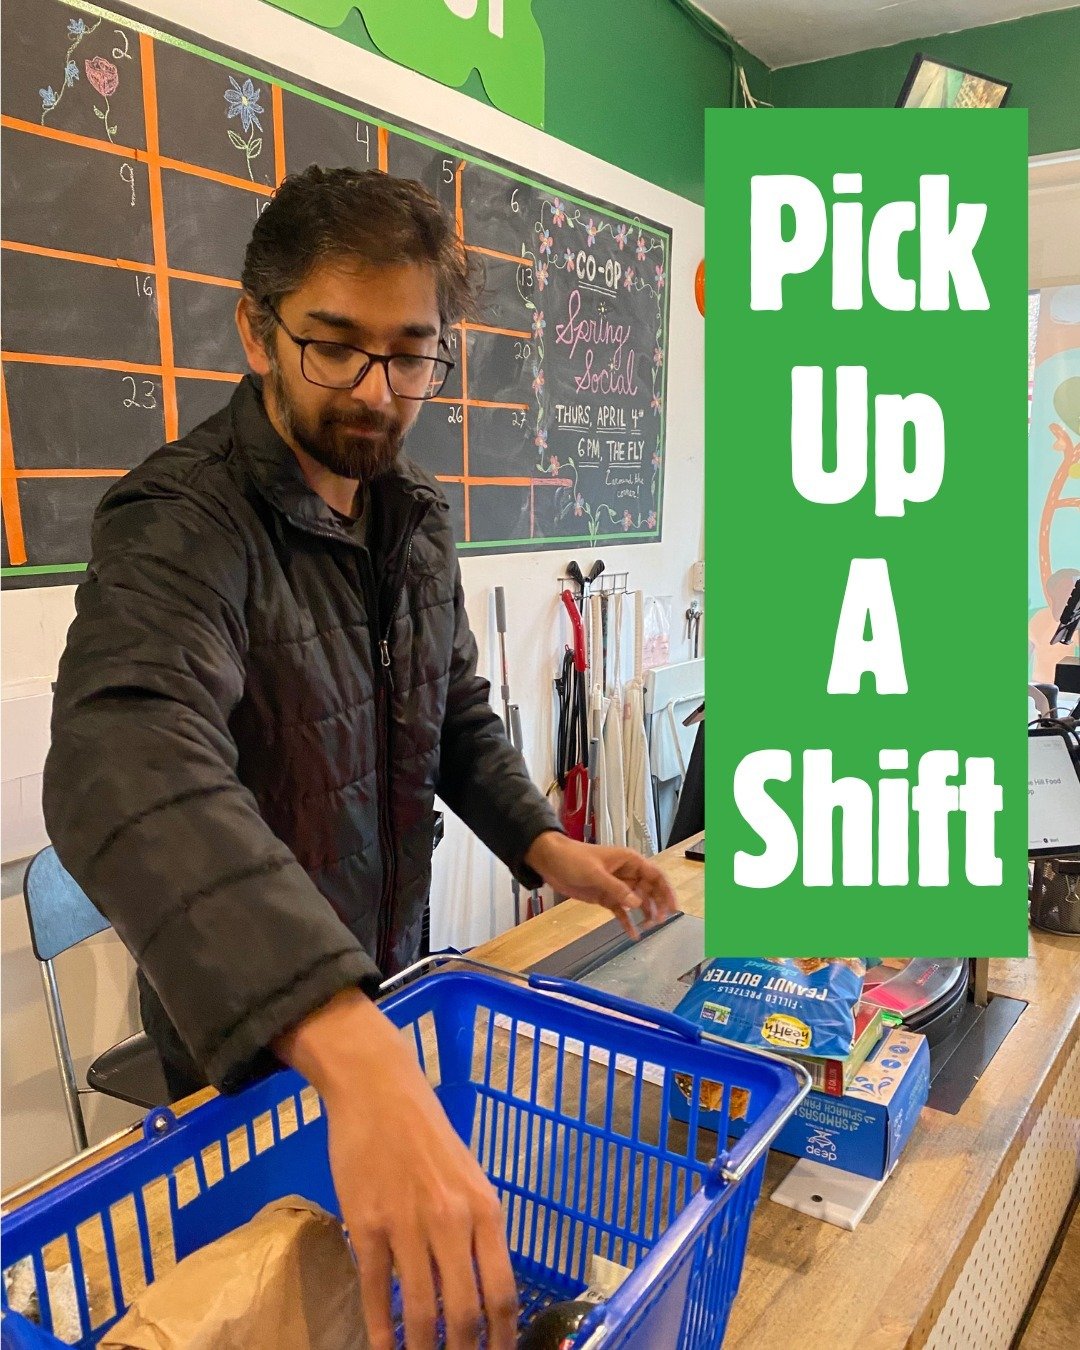 Do you have hours to make up at the Co-op? It's a great time to pick up a spare shift and get caught up while helping us stay fully staffed and able to thrive!  Look for the Shifts email and see where you're needed the most.⁠
⁠
[Image: Co-op member-o